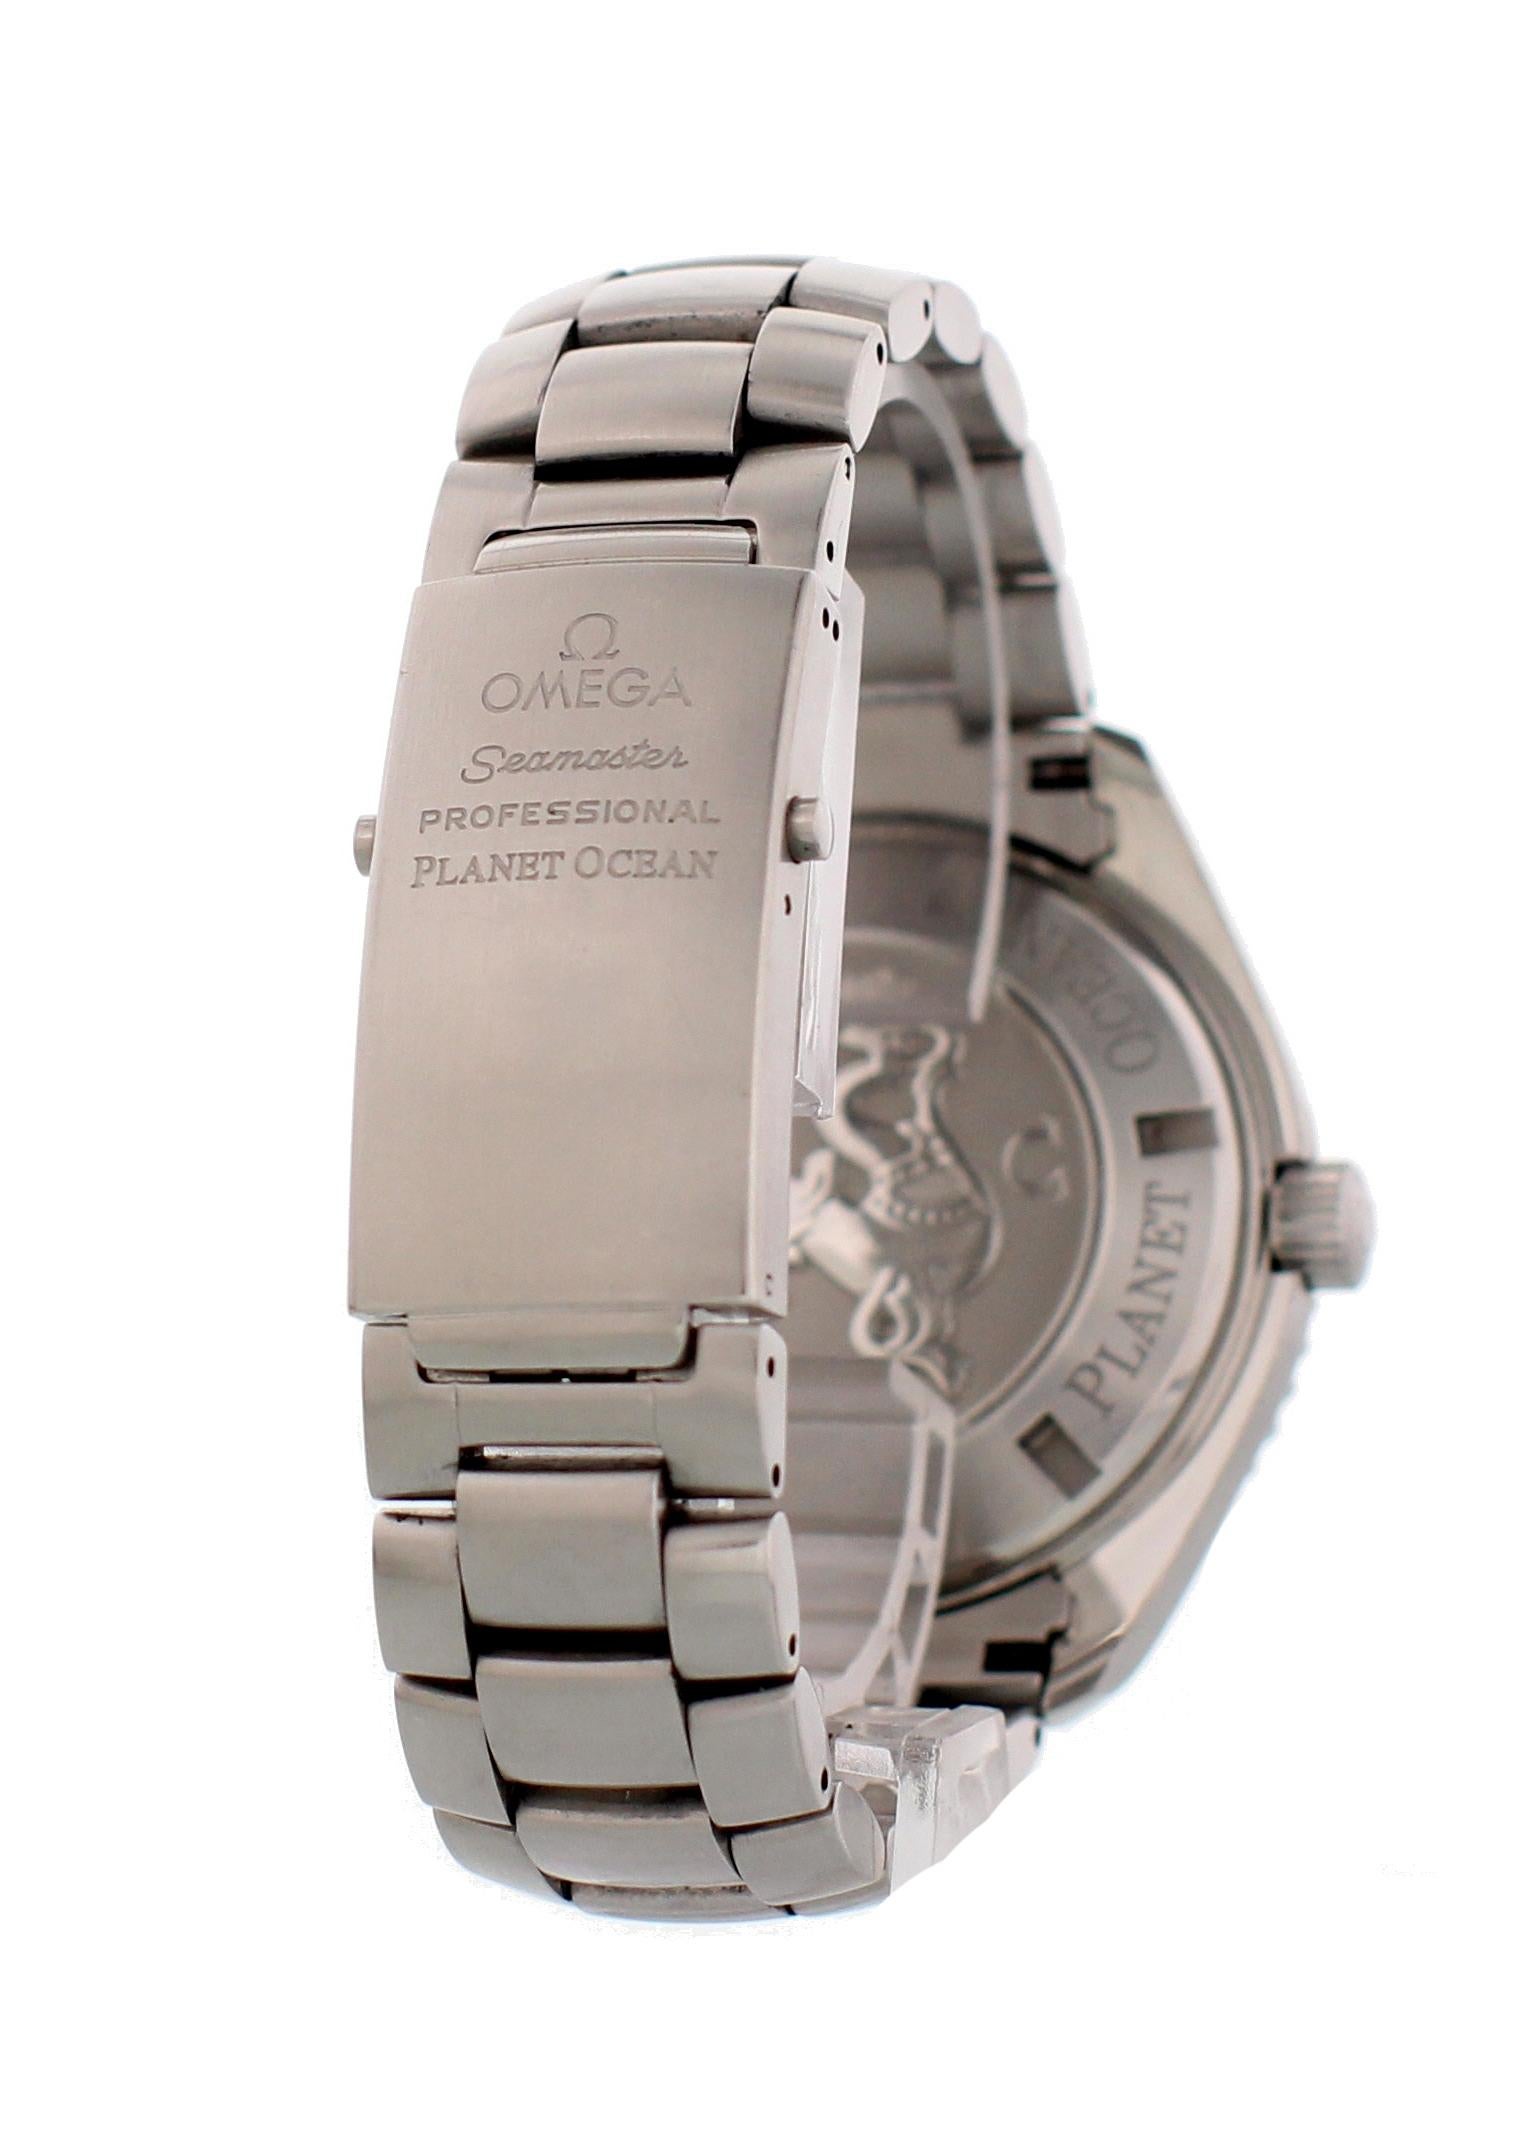 Omega Seamaster Planet Ocean Extra Large 2200.51.00 Co-Axial Men's Watch For Sale 1